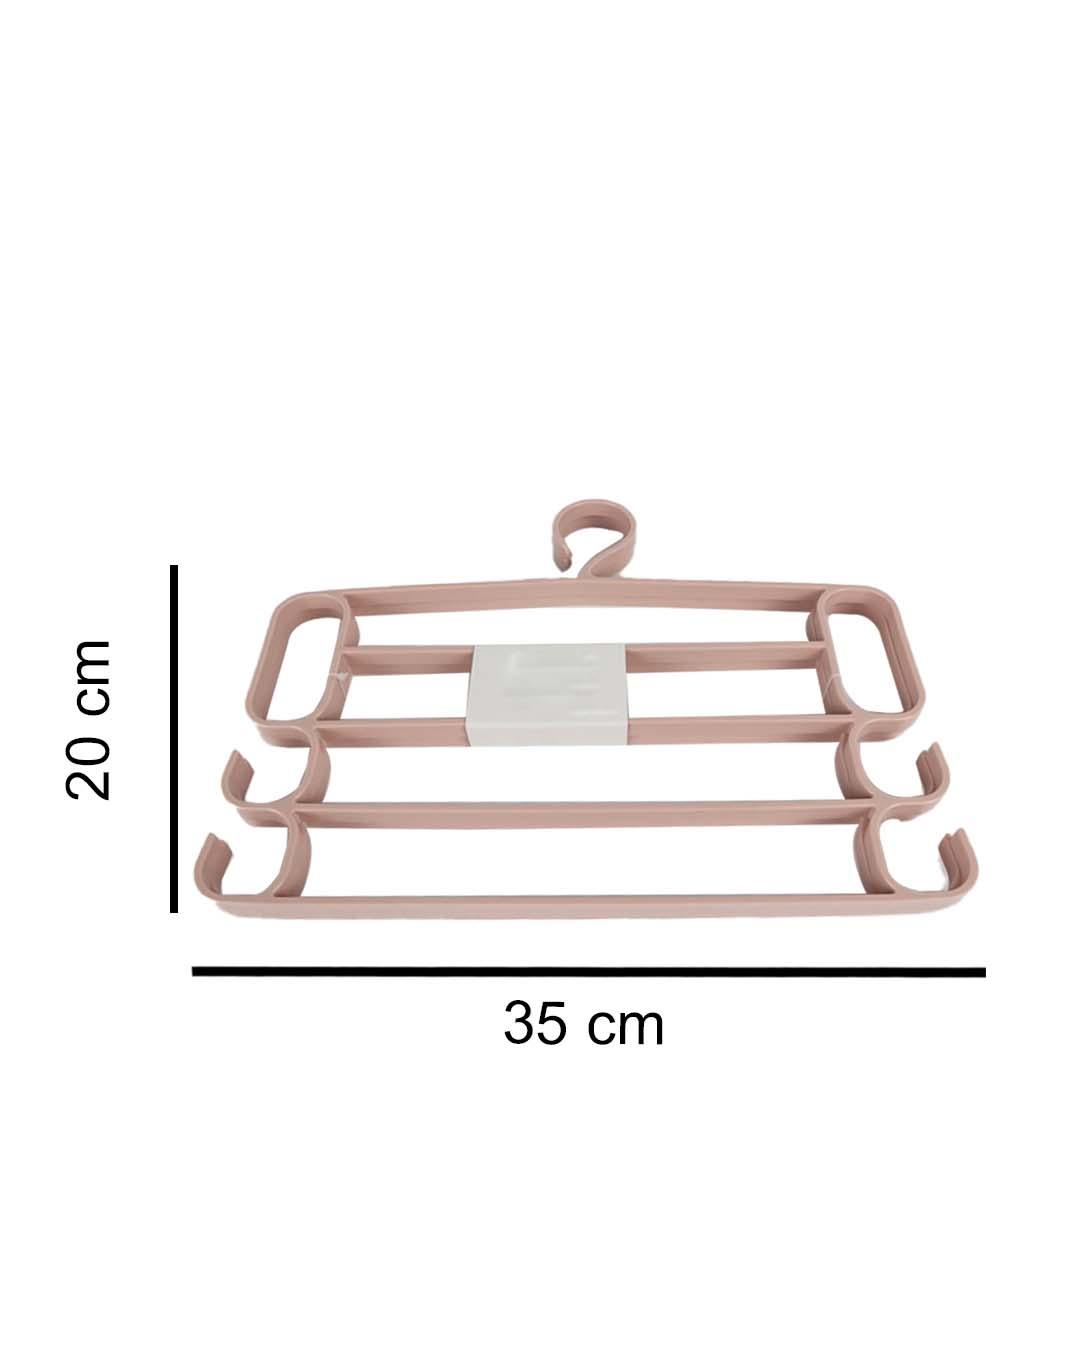 Buy Market99 Plastic Transparent Hangers - Set of 10 at the best price on  Wednesday, February 28, 2024 at 10:55 am +0530 with latest offers in India.  Get Free Shipping on Prepaid order above Rs ₹149 – MARKET99